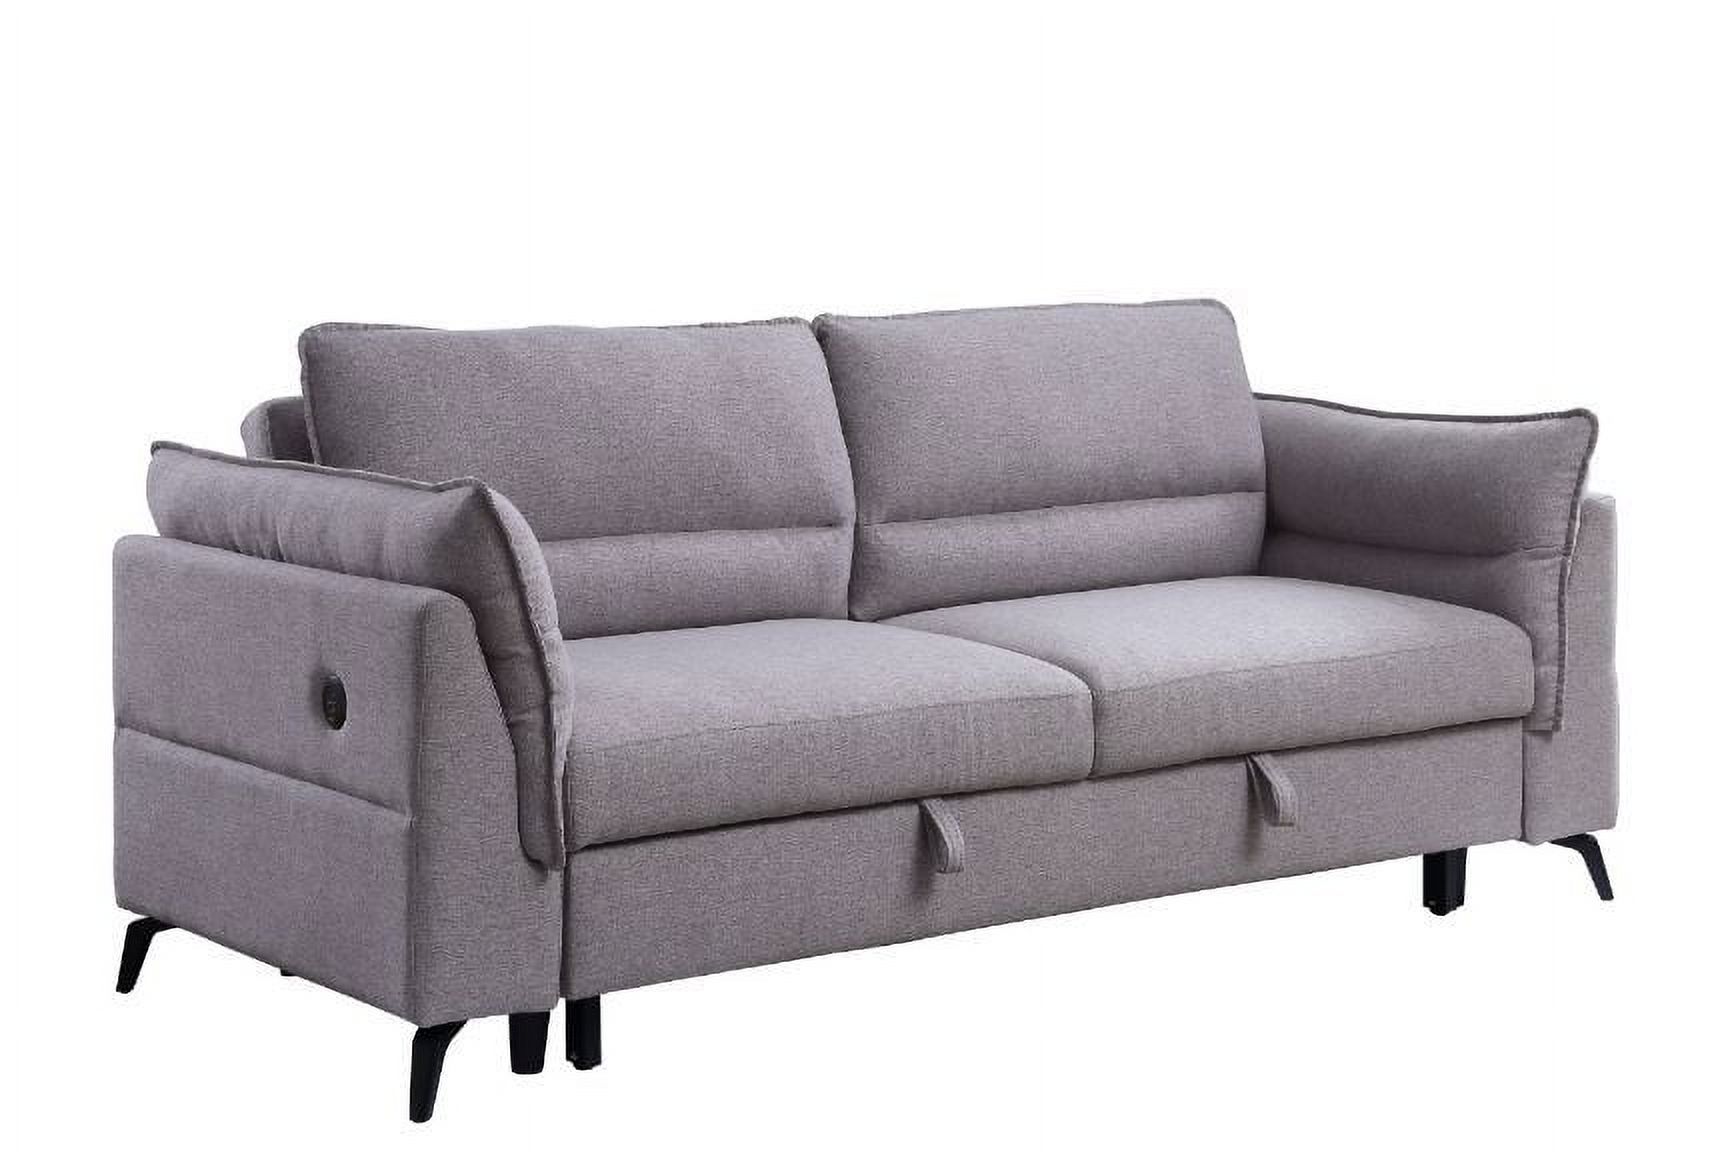 Gray Contemporary Living Room Furniture Pull-out Sleeper Sofa Built in USB Port - image 2 of 3